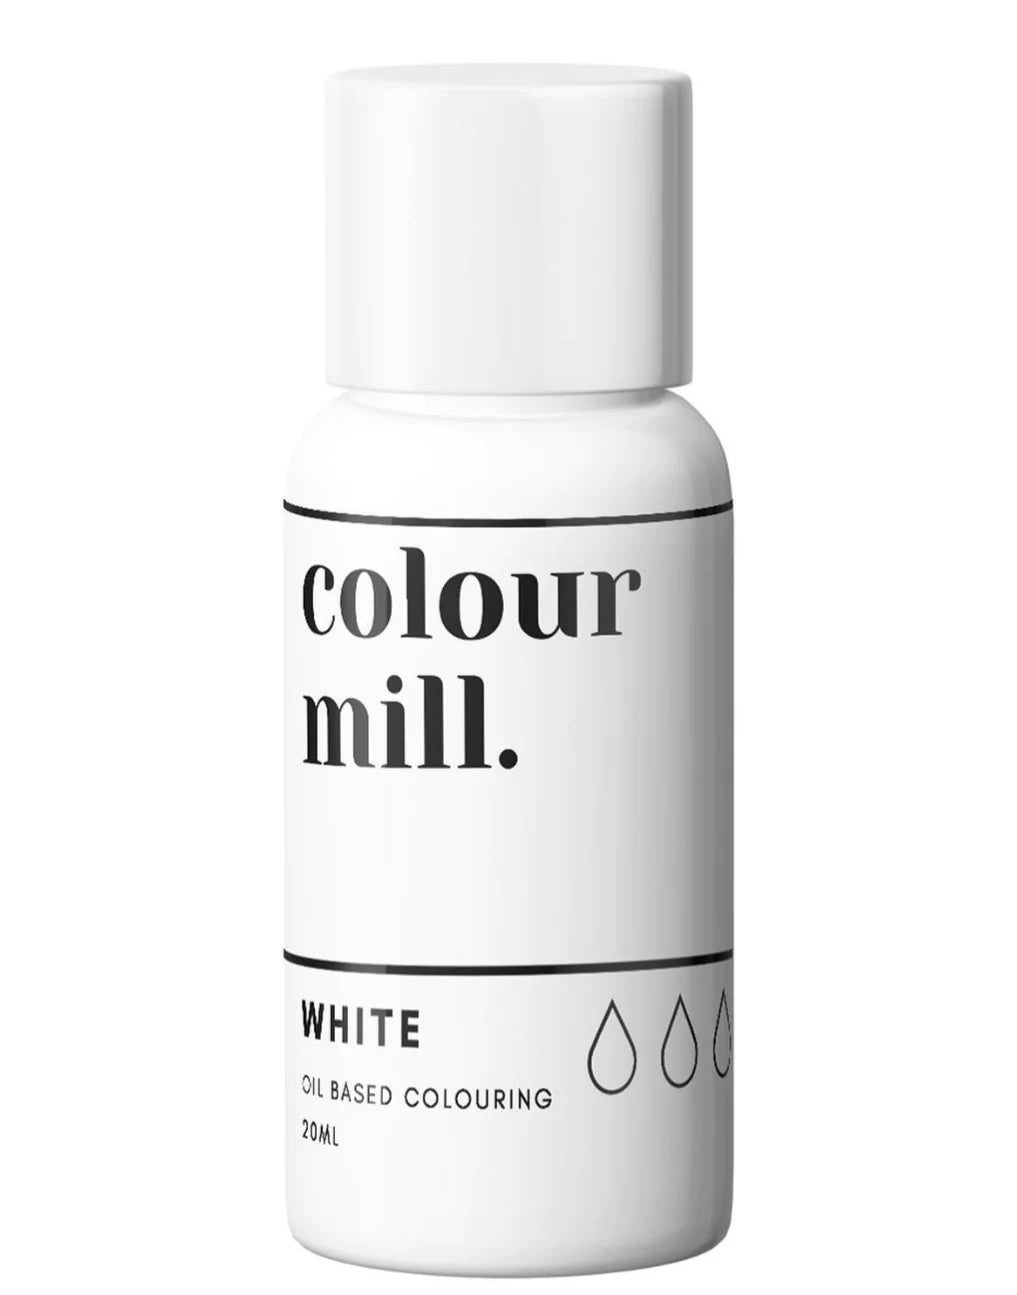 Colour Mill Launch - 9 New Colours & 7 New Sets